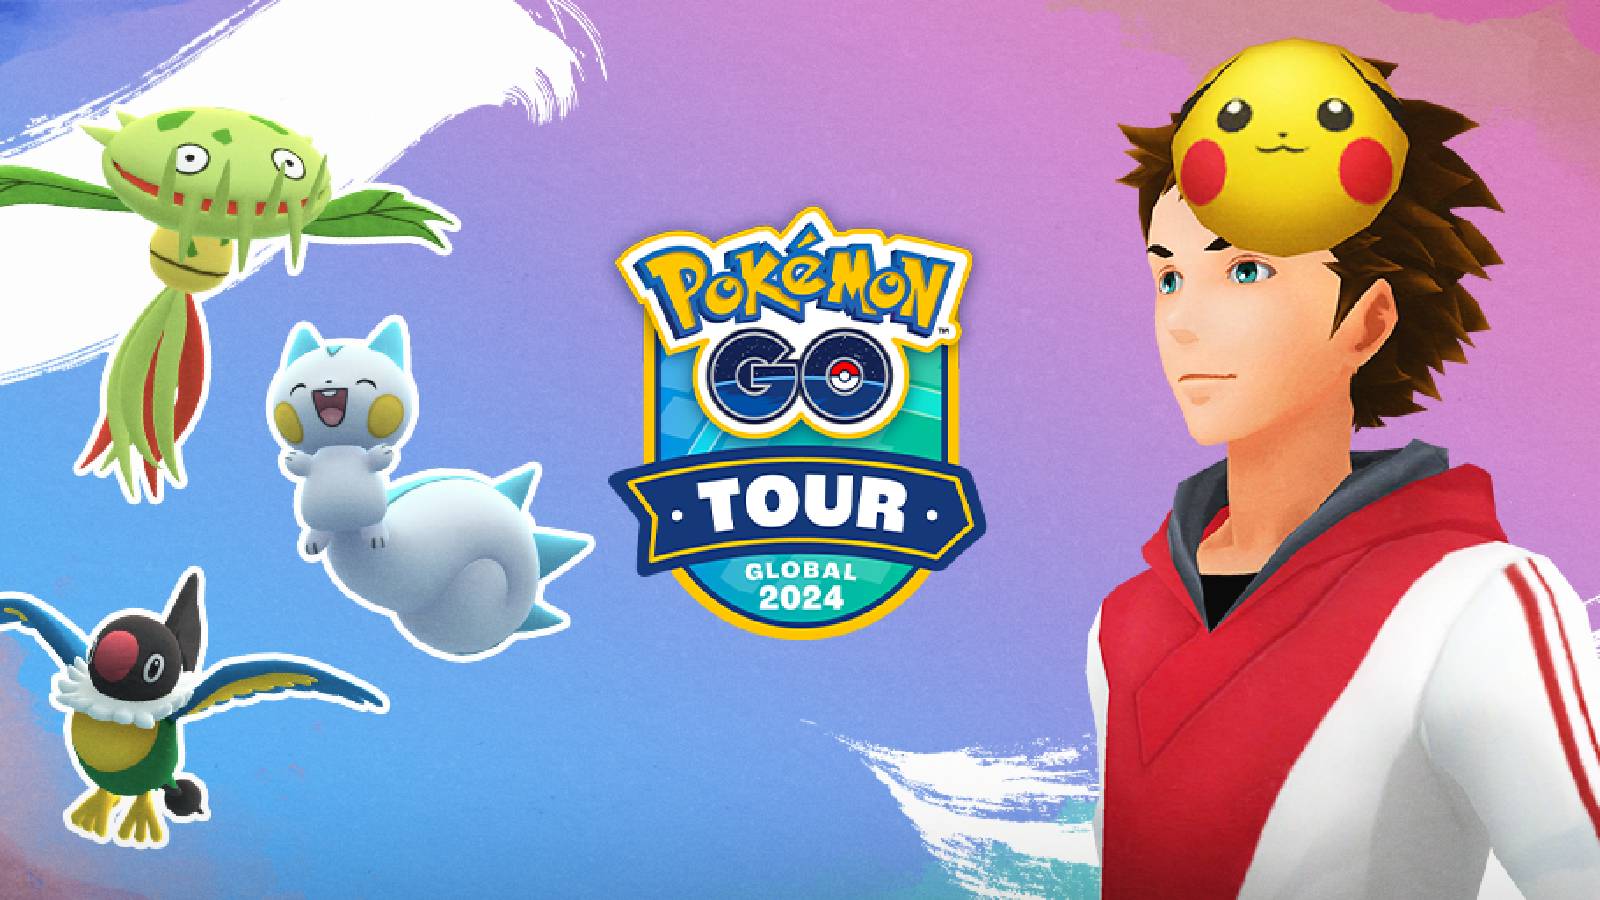 Promotional art shows the rewards for the POkemon Go Road to Sinnoh Hatch Challenge